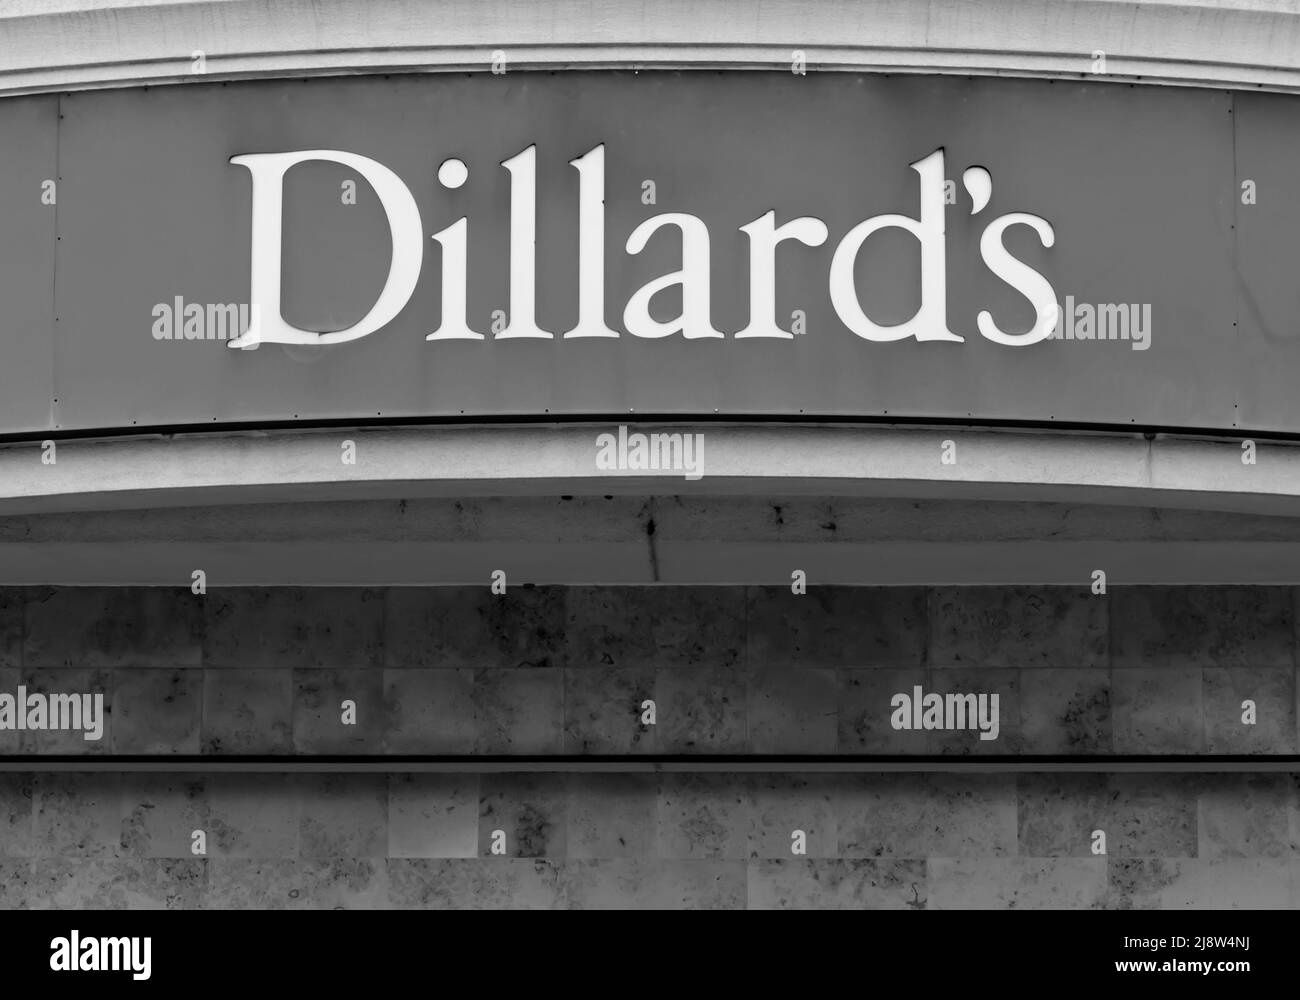 Outdoor shopping mall facade brand signage for 'Dillard's' higher end department store in white letters on a grey background at Southpark Mall. Stock Photo